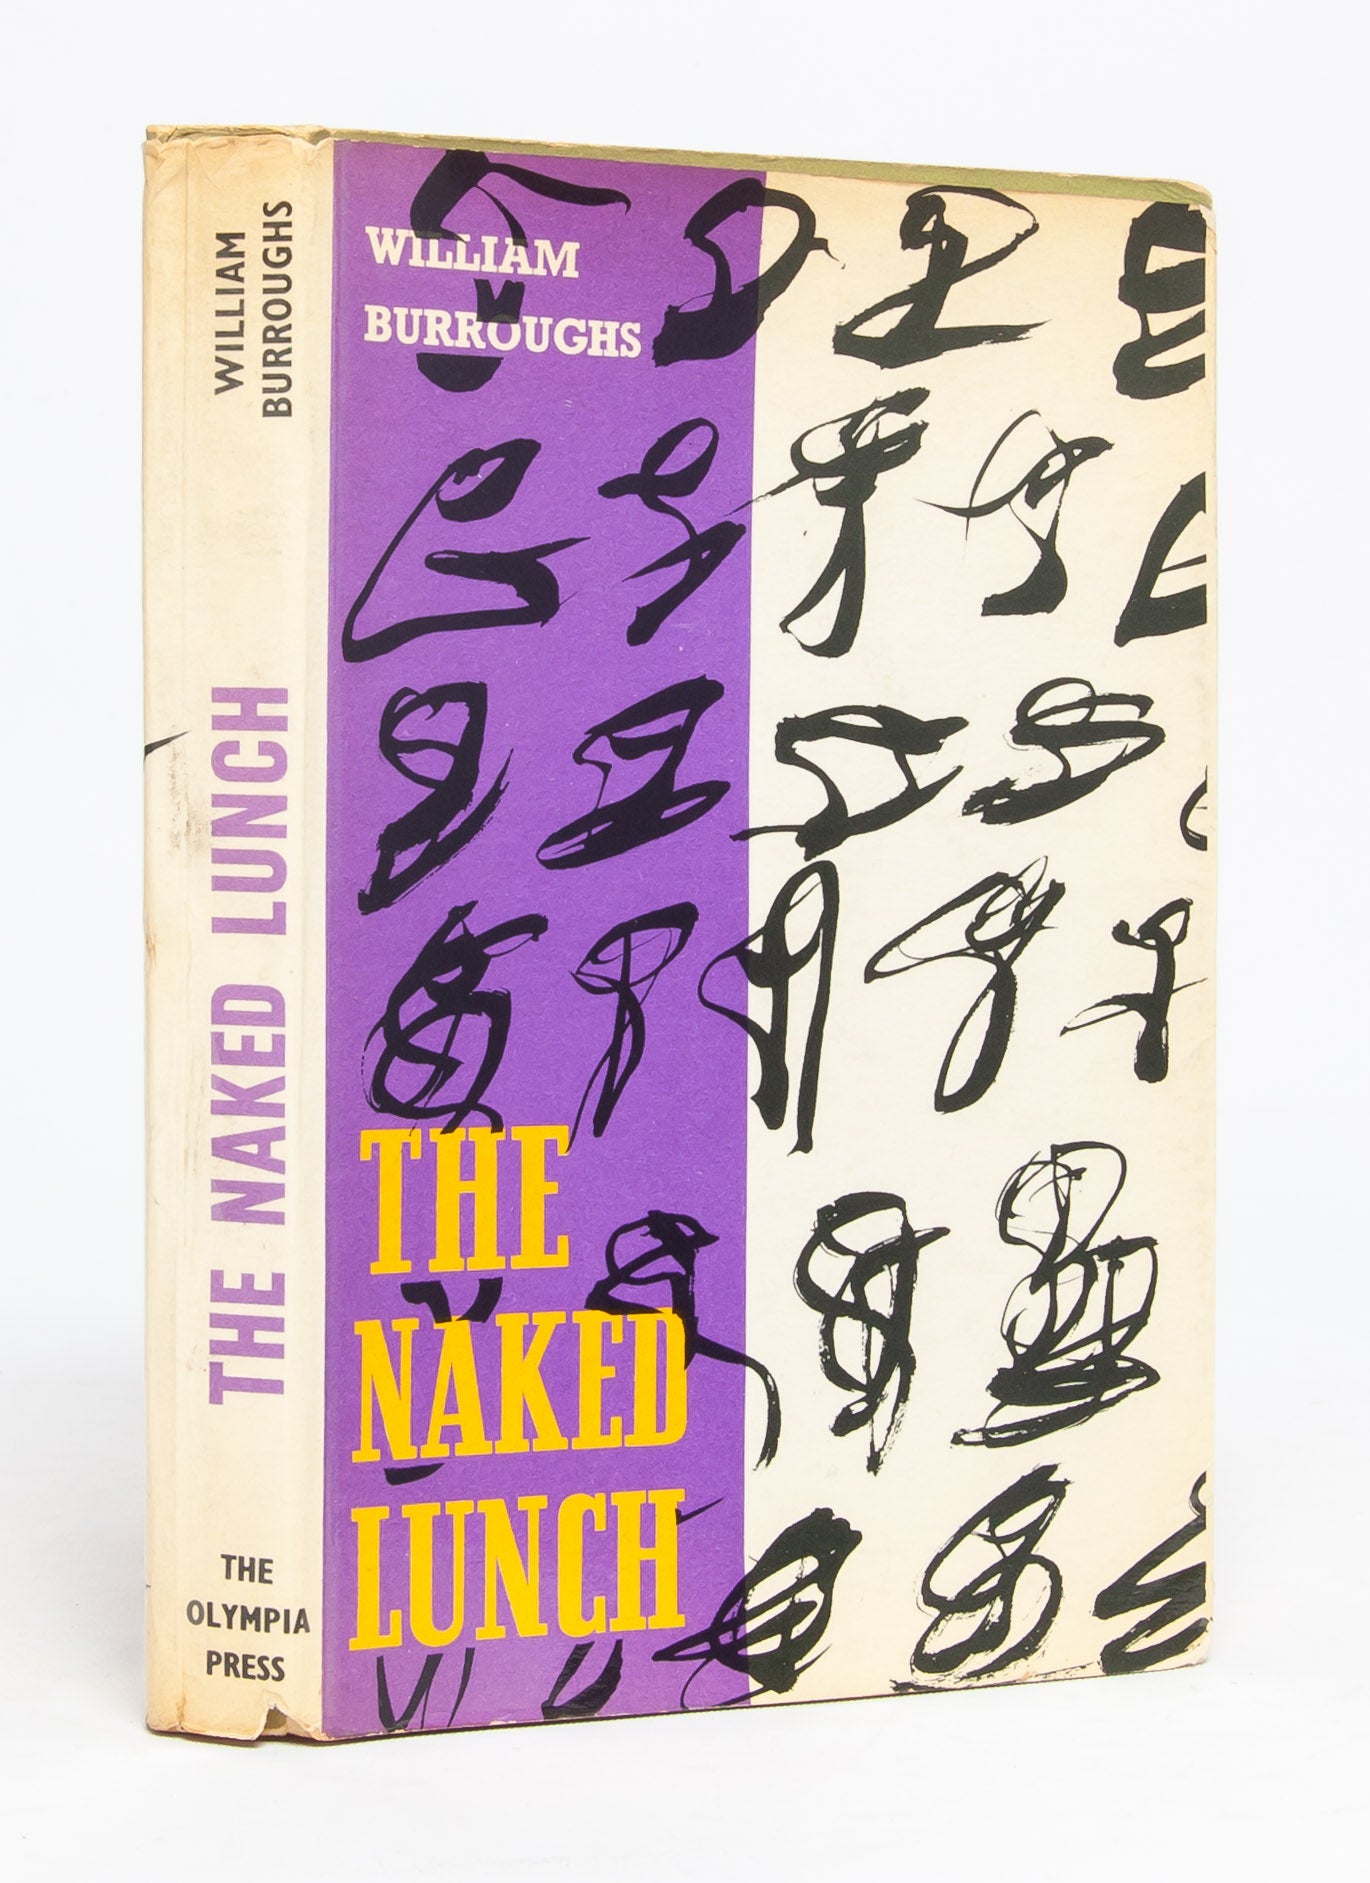 (Item #5595) The Naked Lunch. William Burroughs.